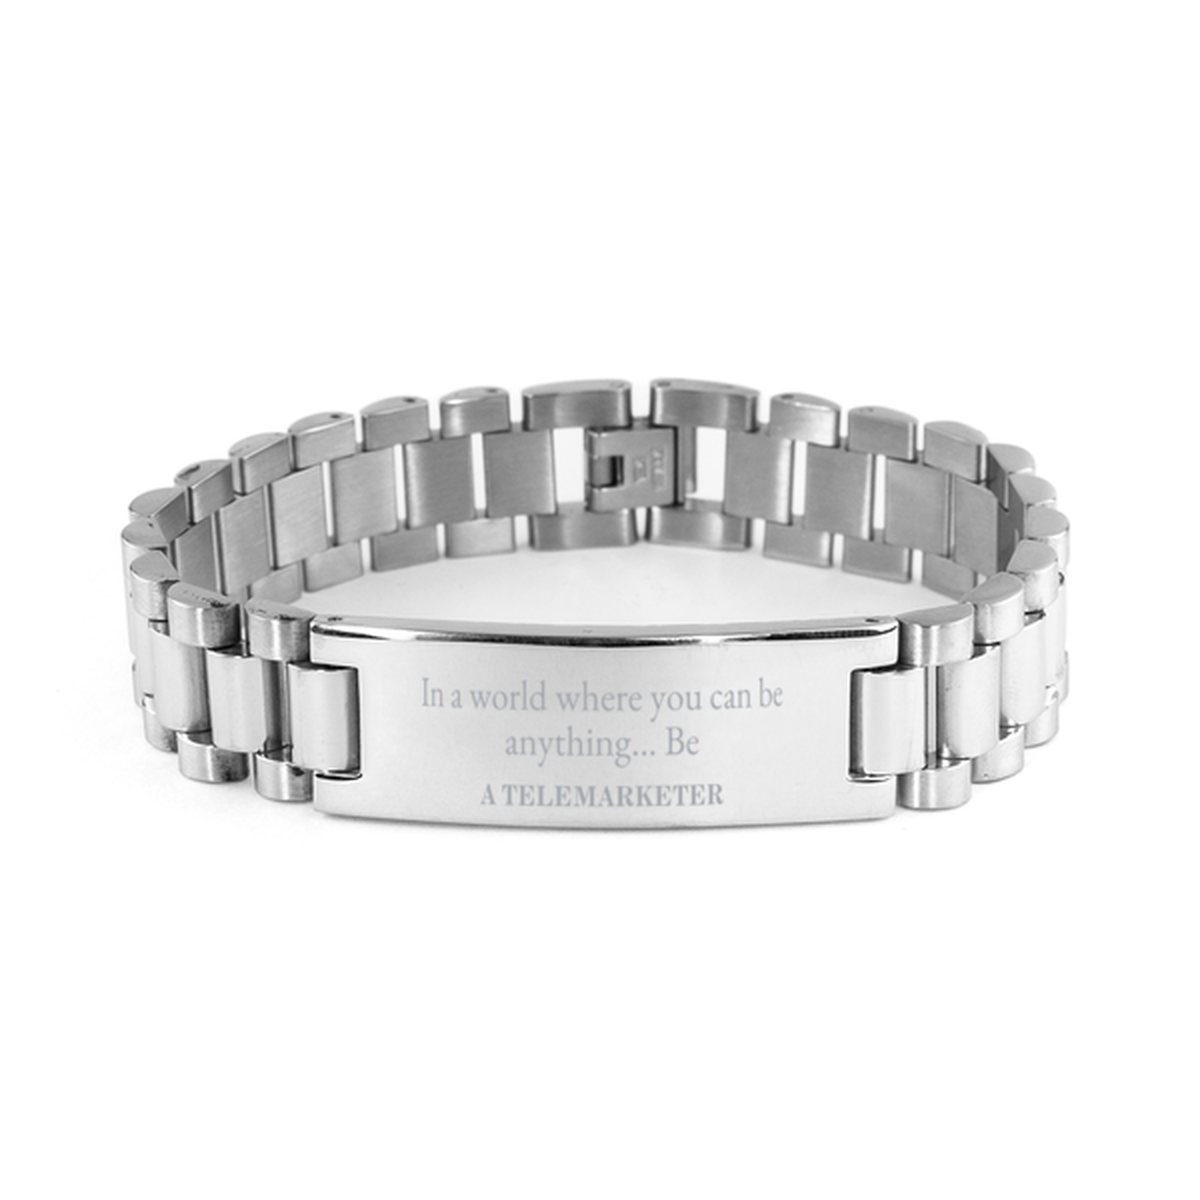 Gifts for Telemarketer, In a world where you can be anything, Appreciation Birthday Ladder Stainless Steel Bracelet for Men, Women, Friends, Coworkers